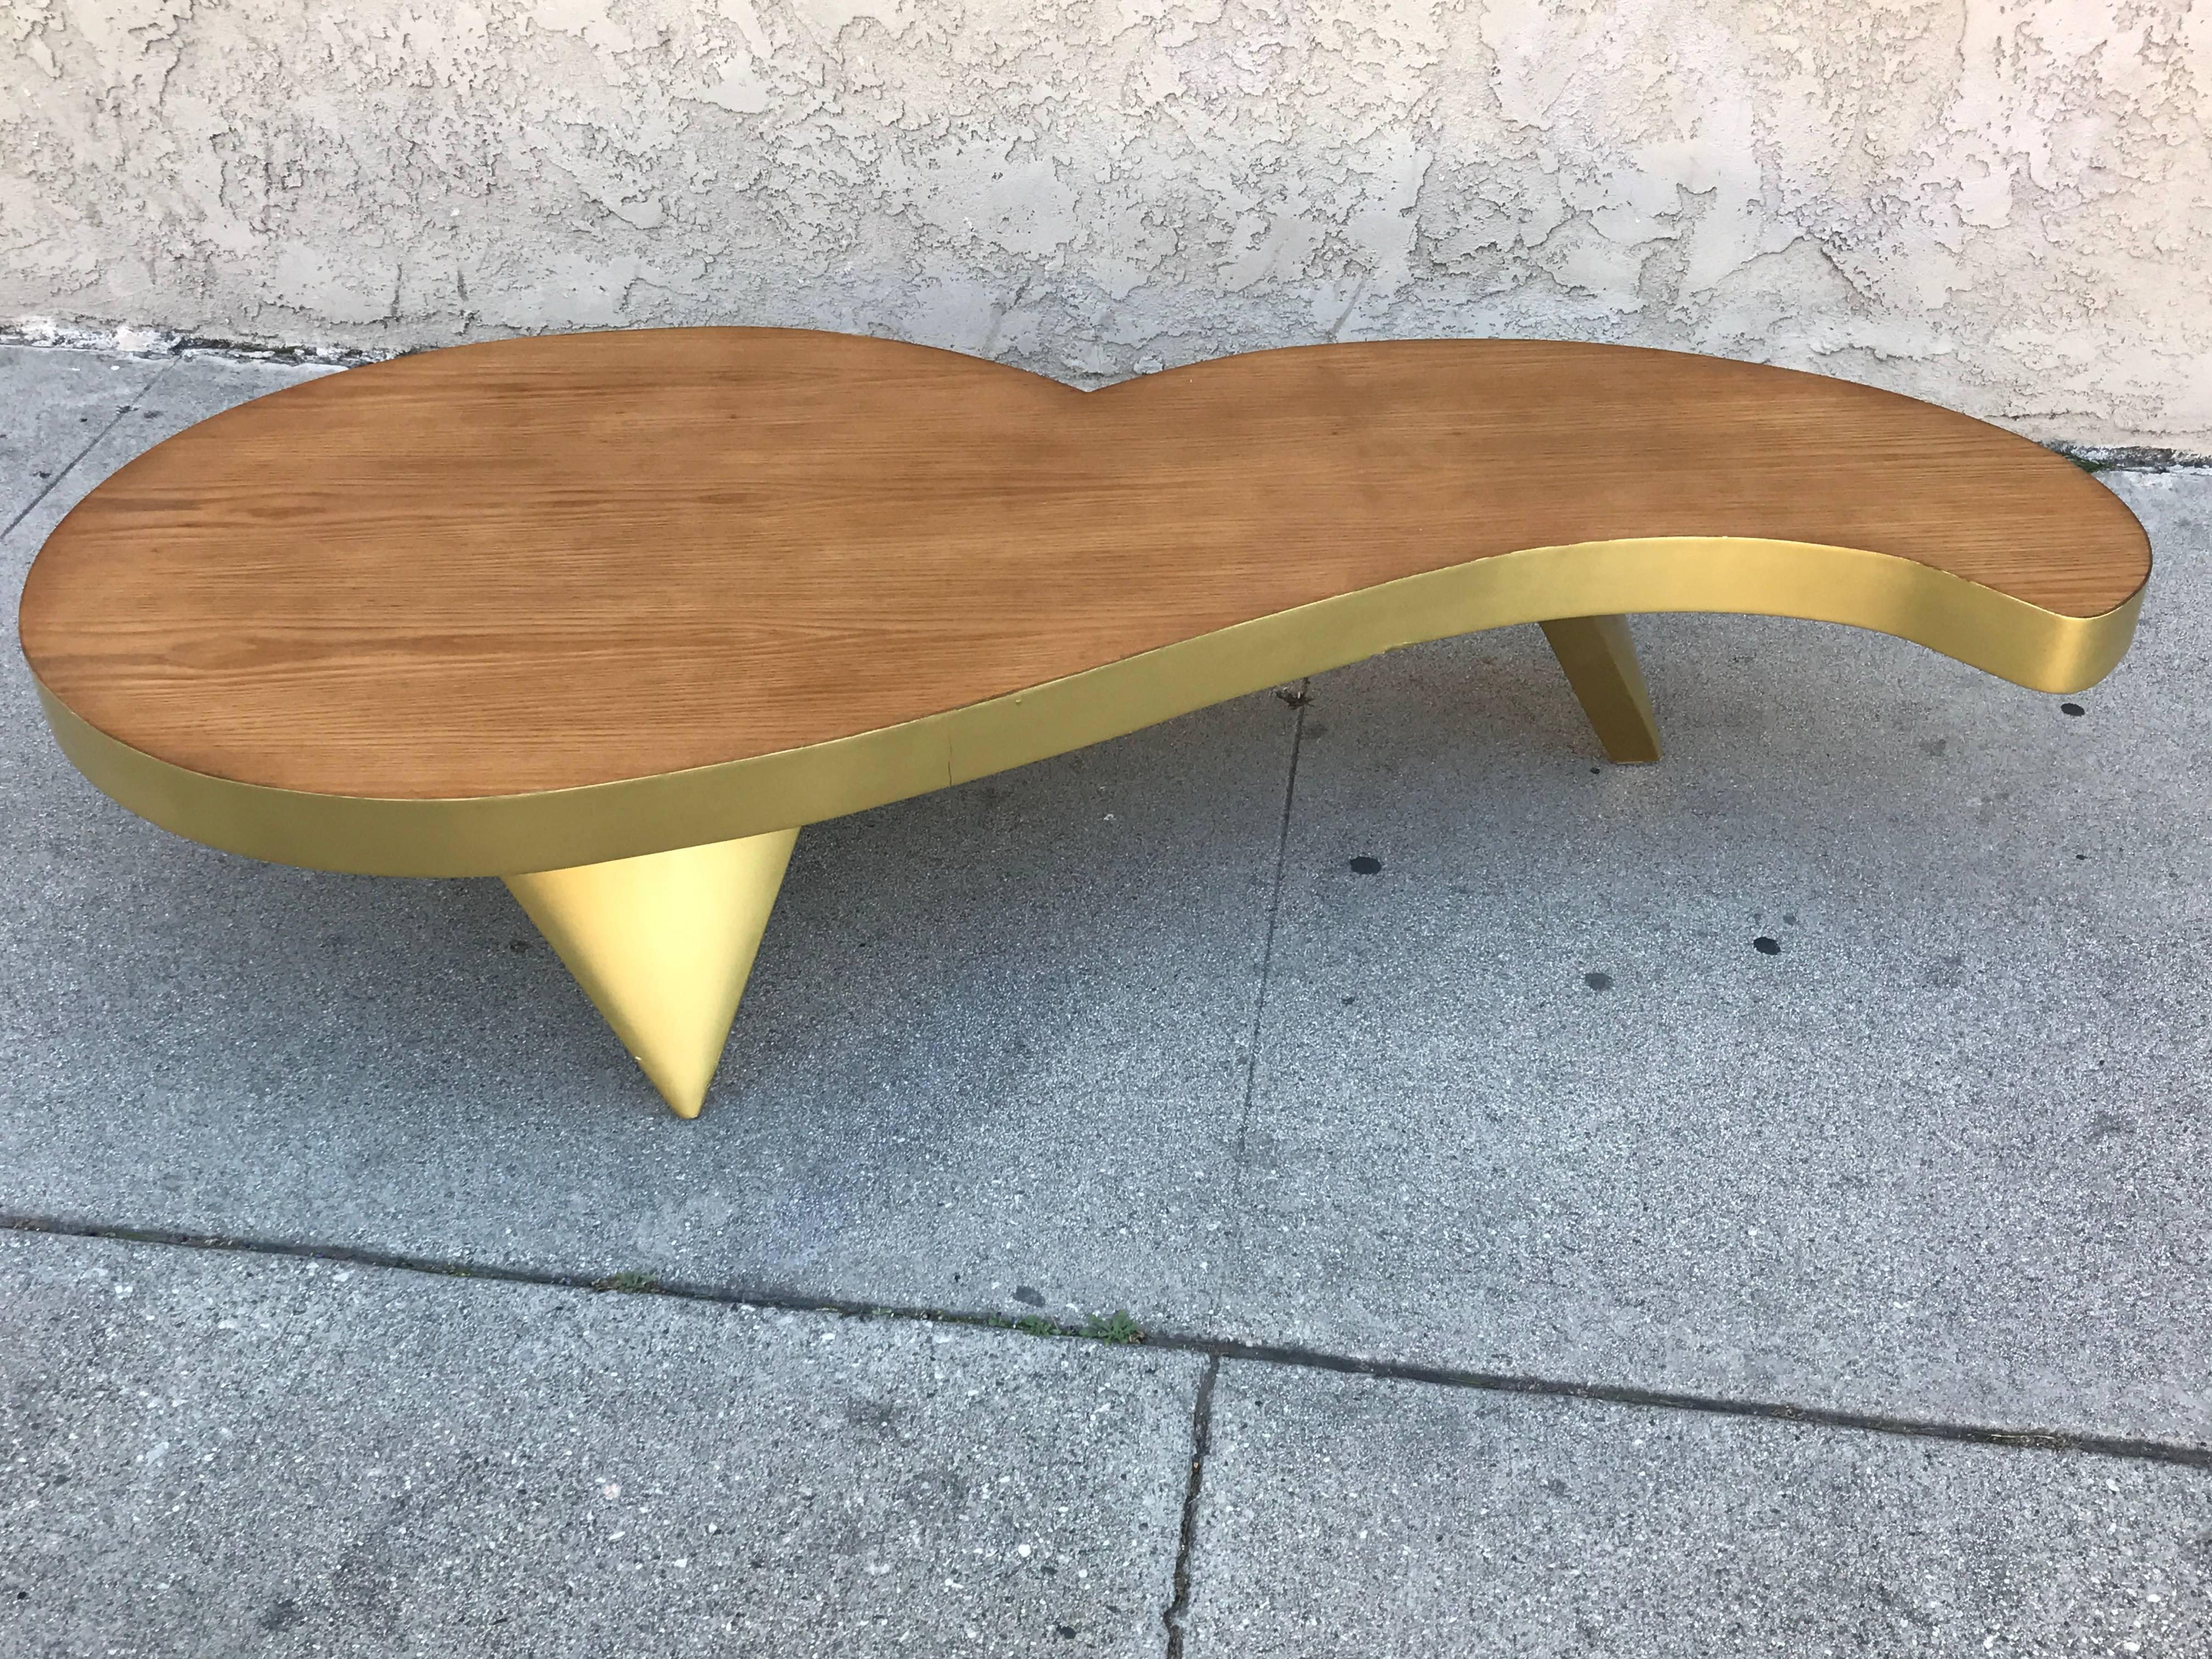 American Unusual and Whimsical Shape 1980s Coffee Table